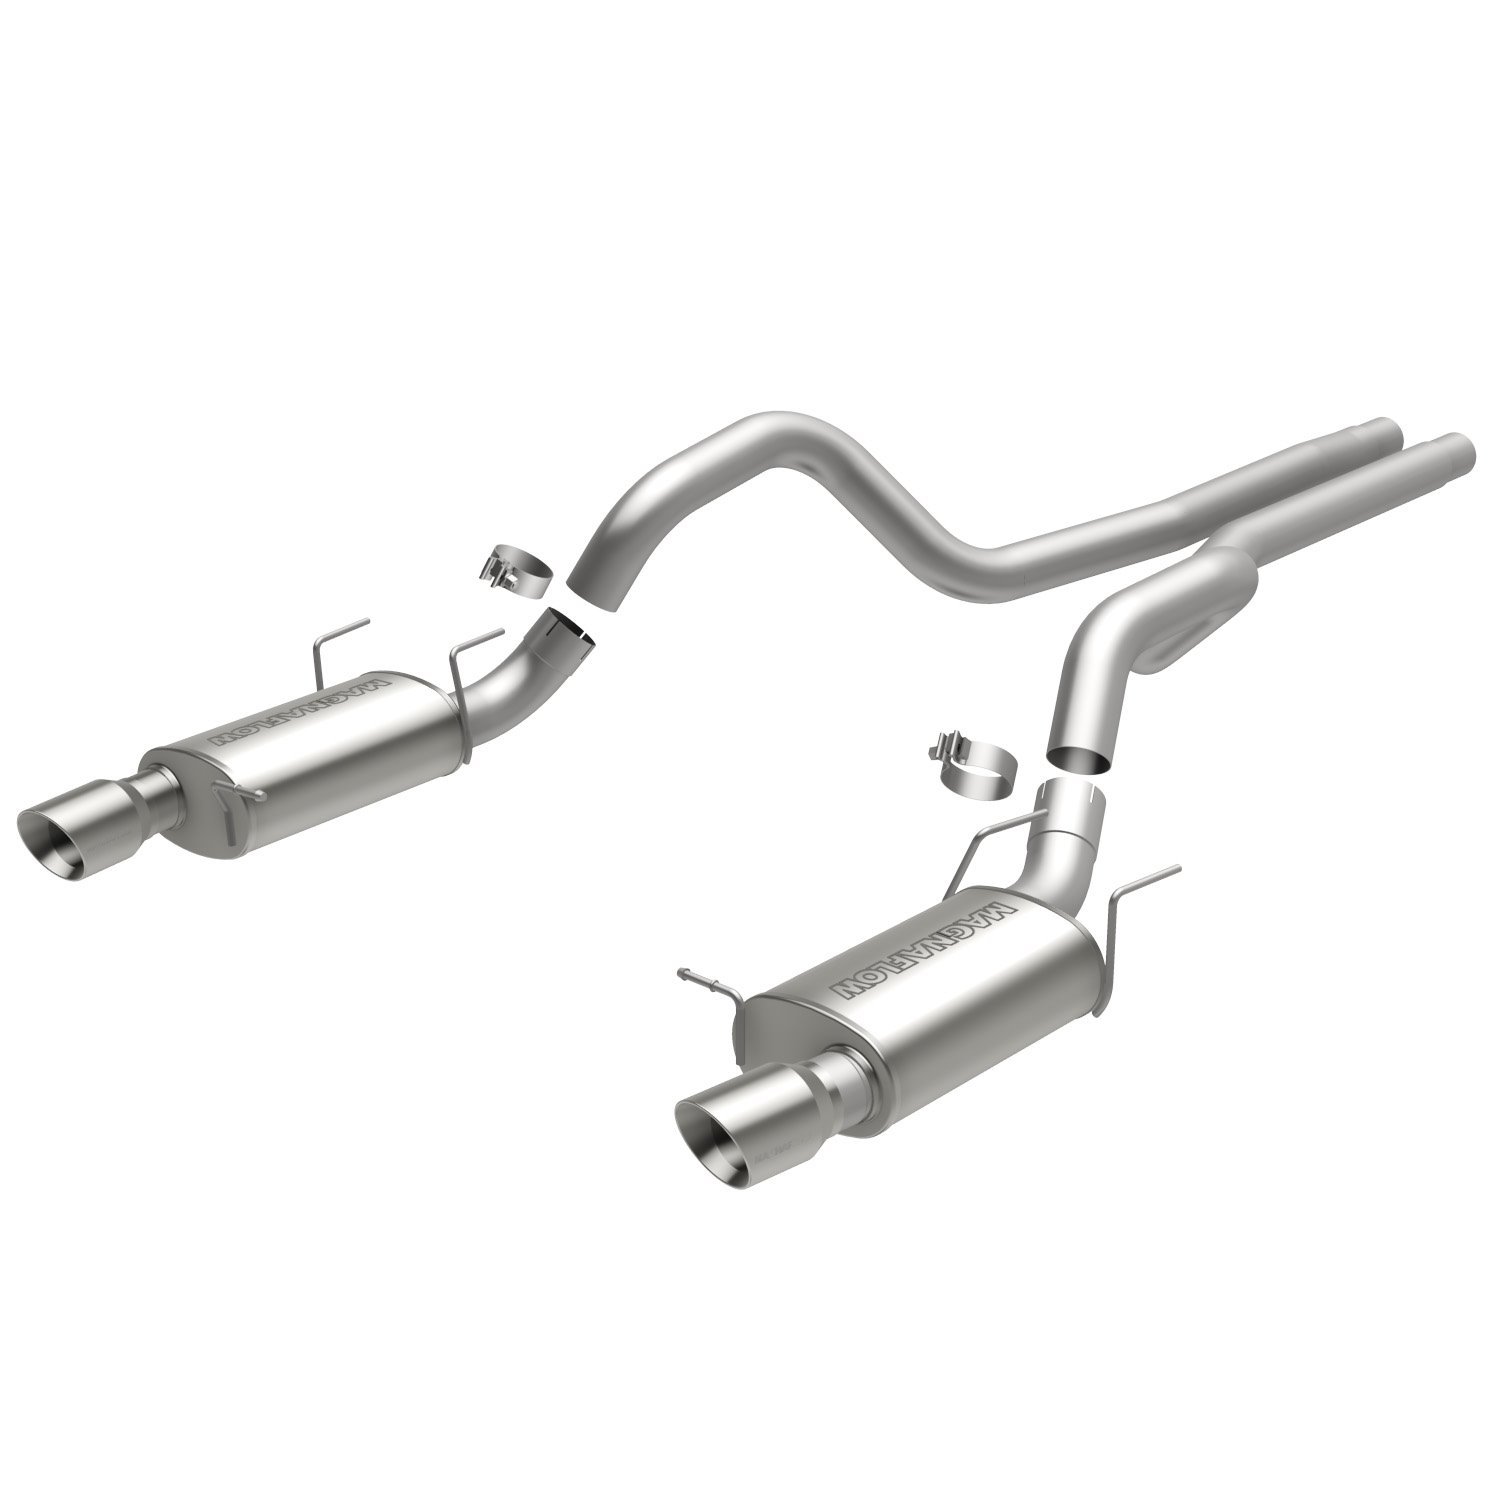 Street Series Cat-Back Exhaust System 2013-2014 Mustang GT